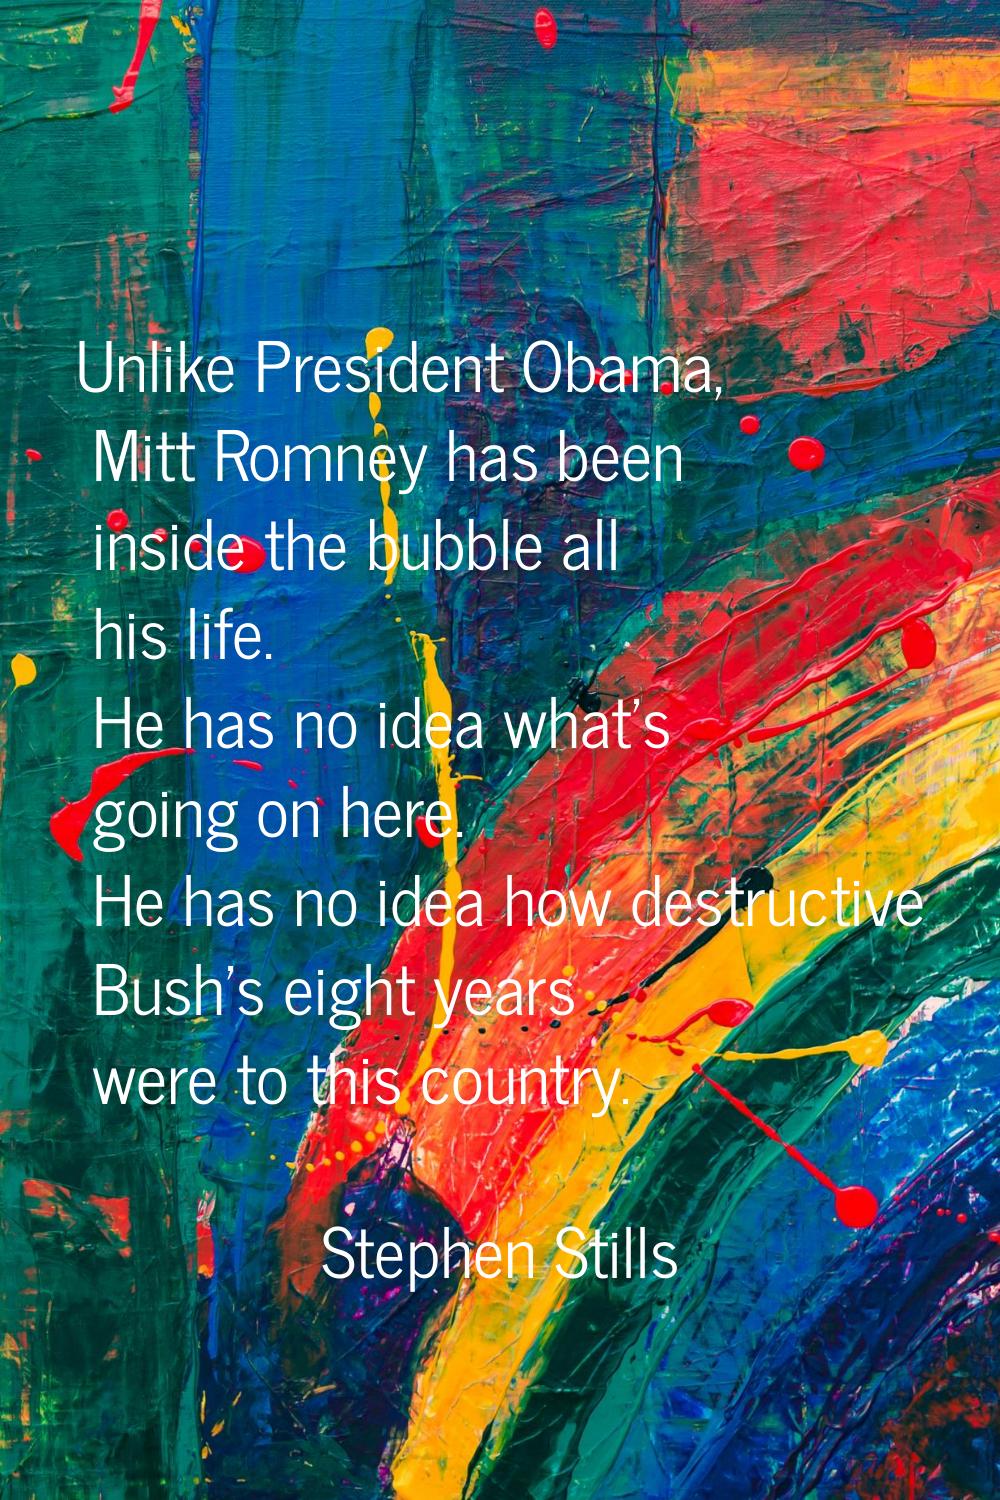 Unlike President Obama, Mitt Romney has been inside the bubble all his life. He has no idea what's 